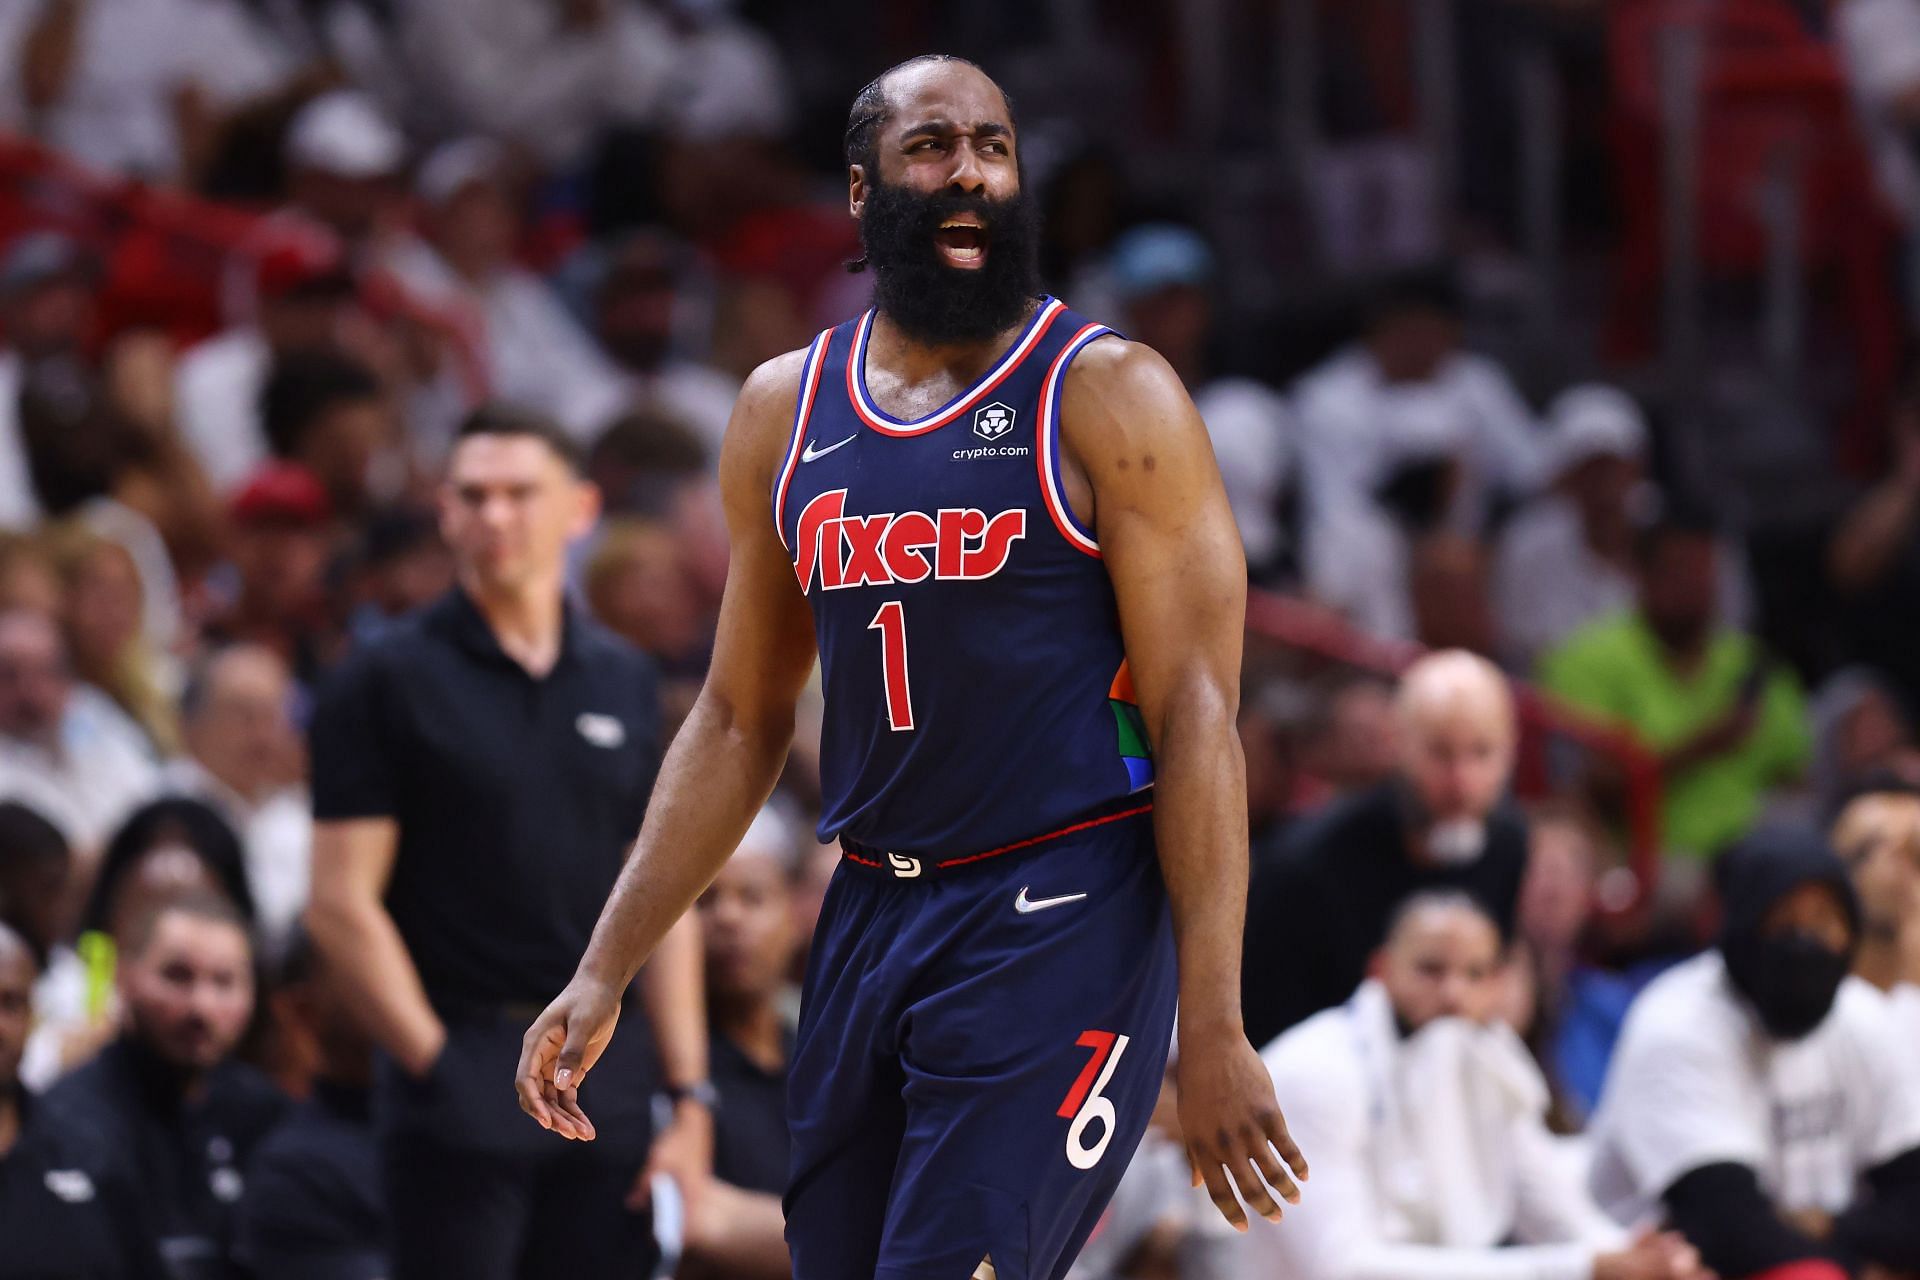 James Harden reacts to a play in Game 1 against the Heat.